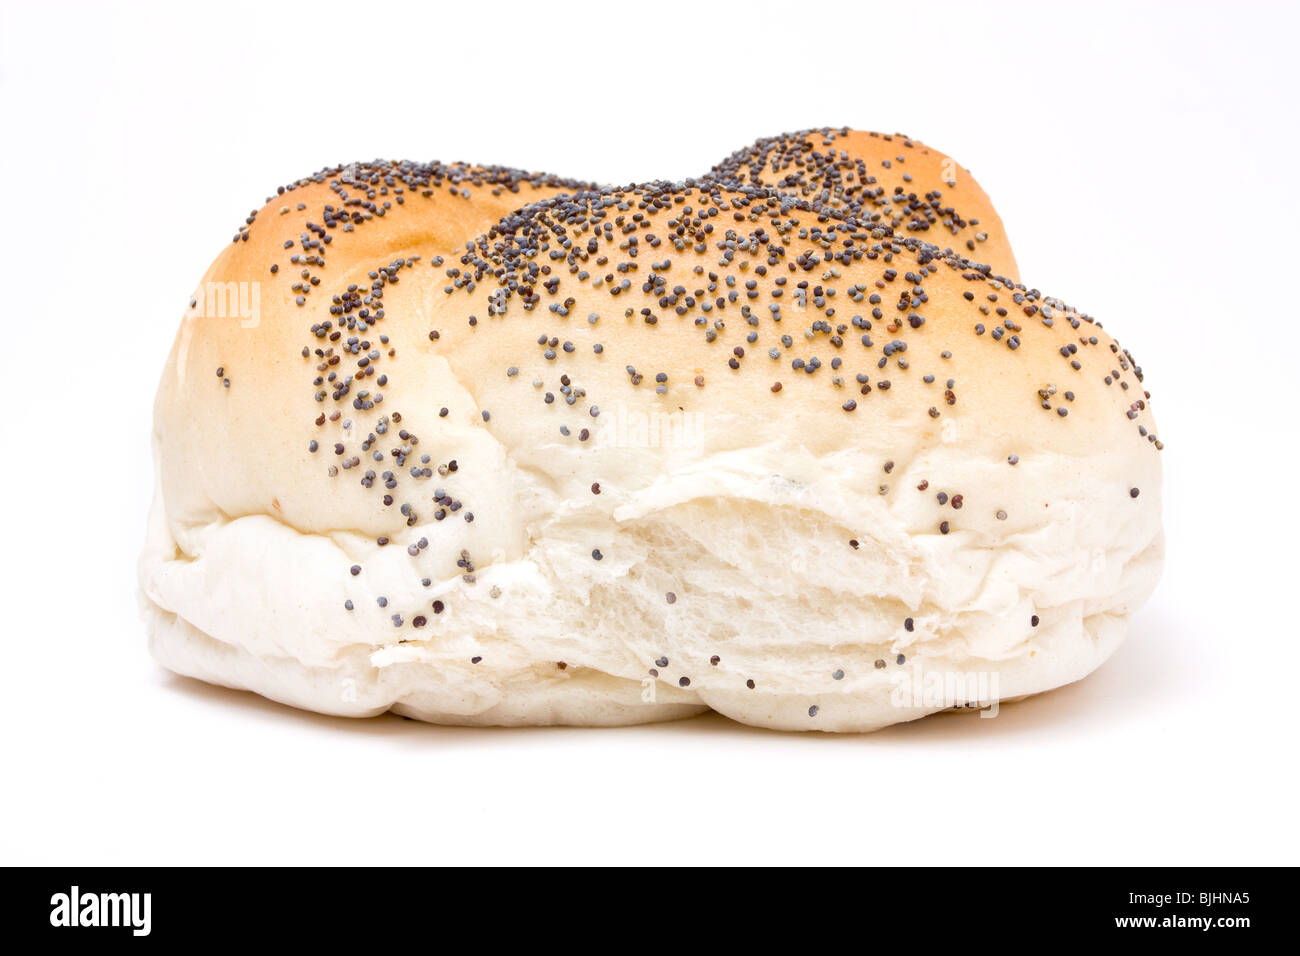 Seeded bread roll from low viewpoint isolated against white background. Stock Photo